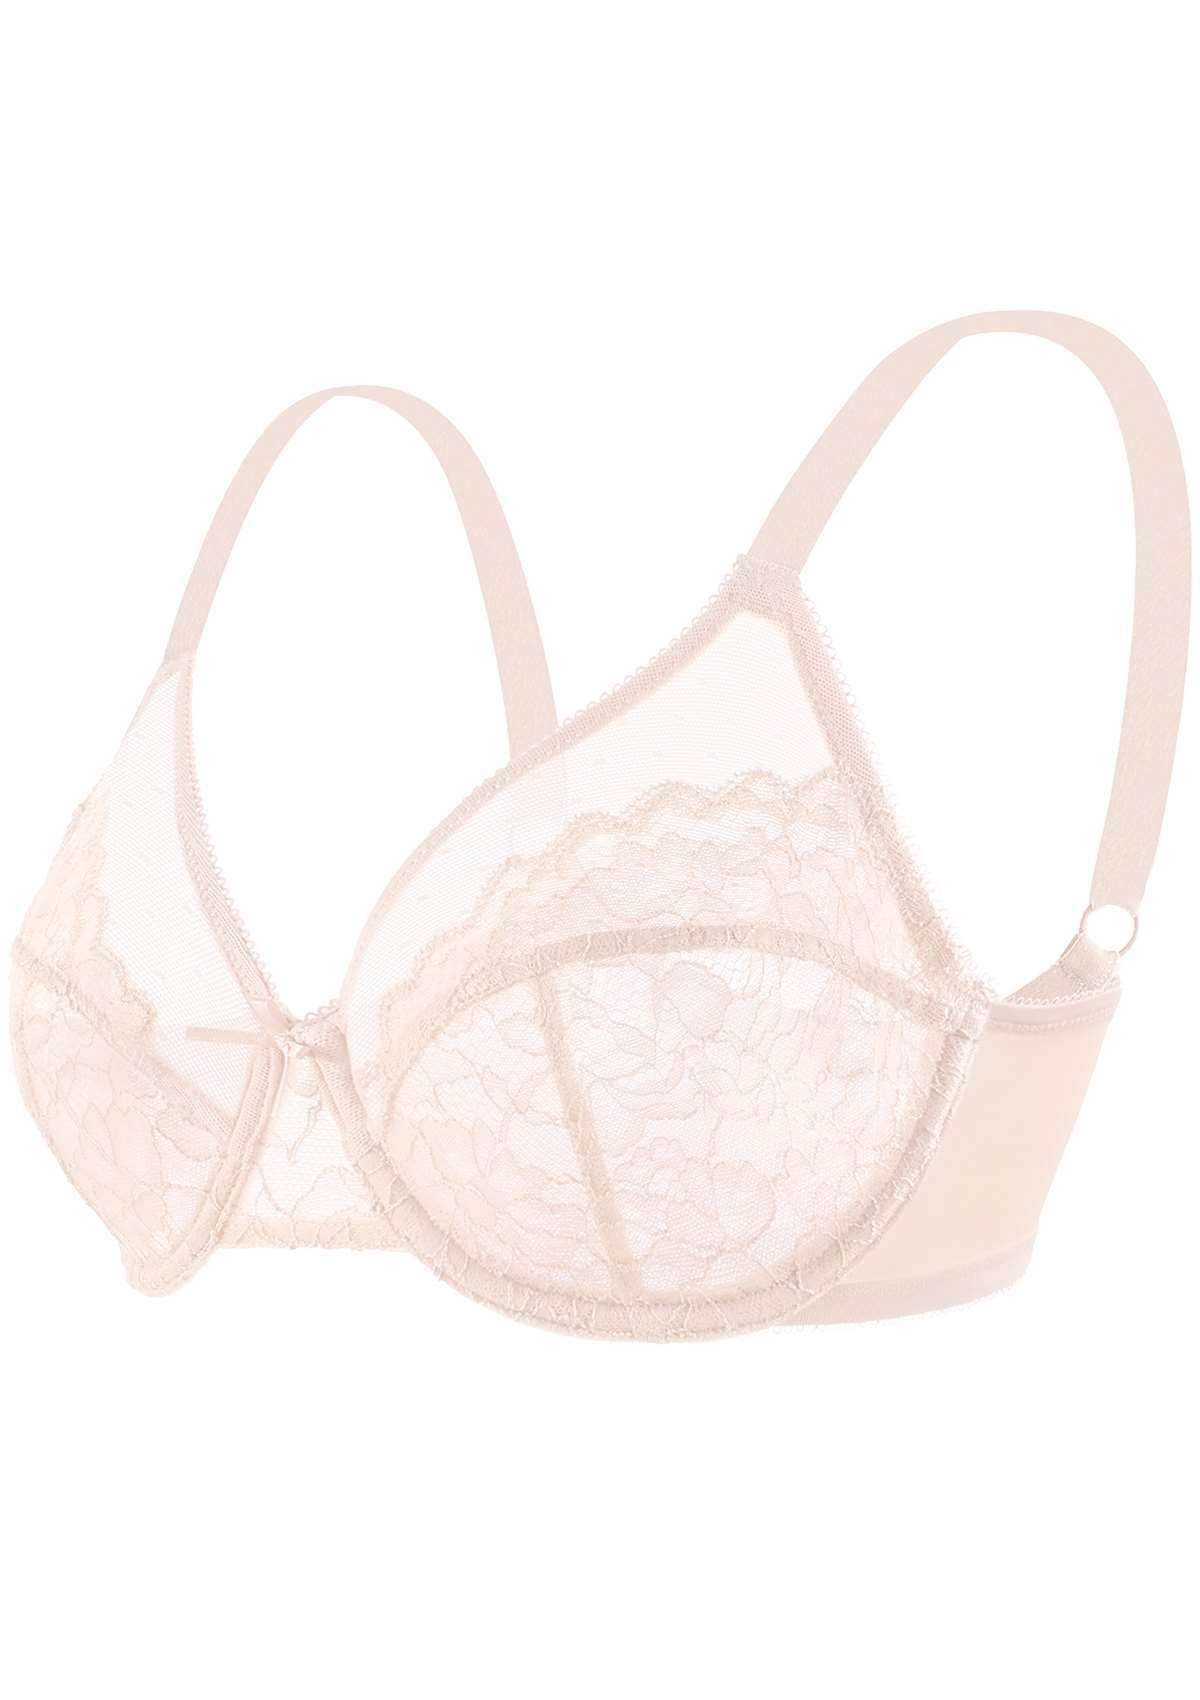 HSIA Enchante Lacy Bra: Comfy Sheer Lace Bra With Lift - Pink / 34 / H